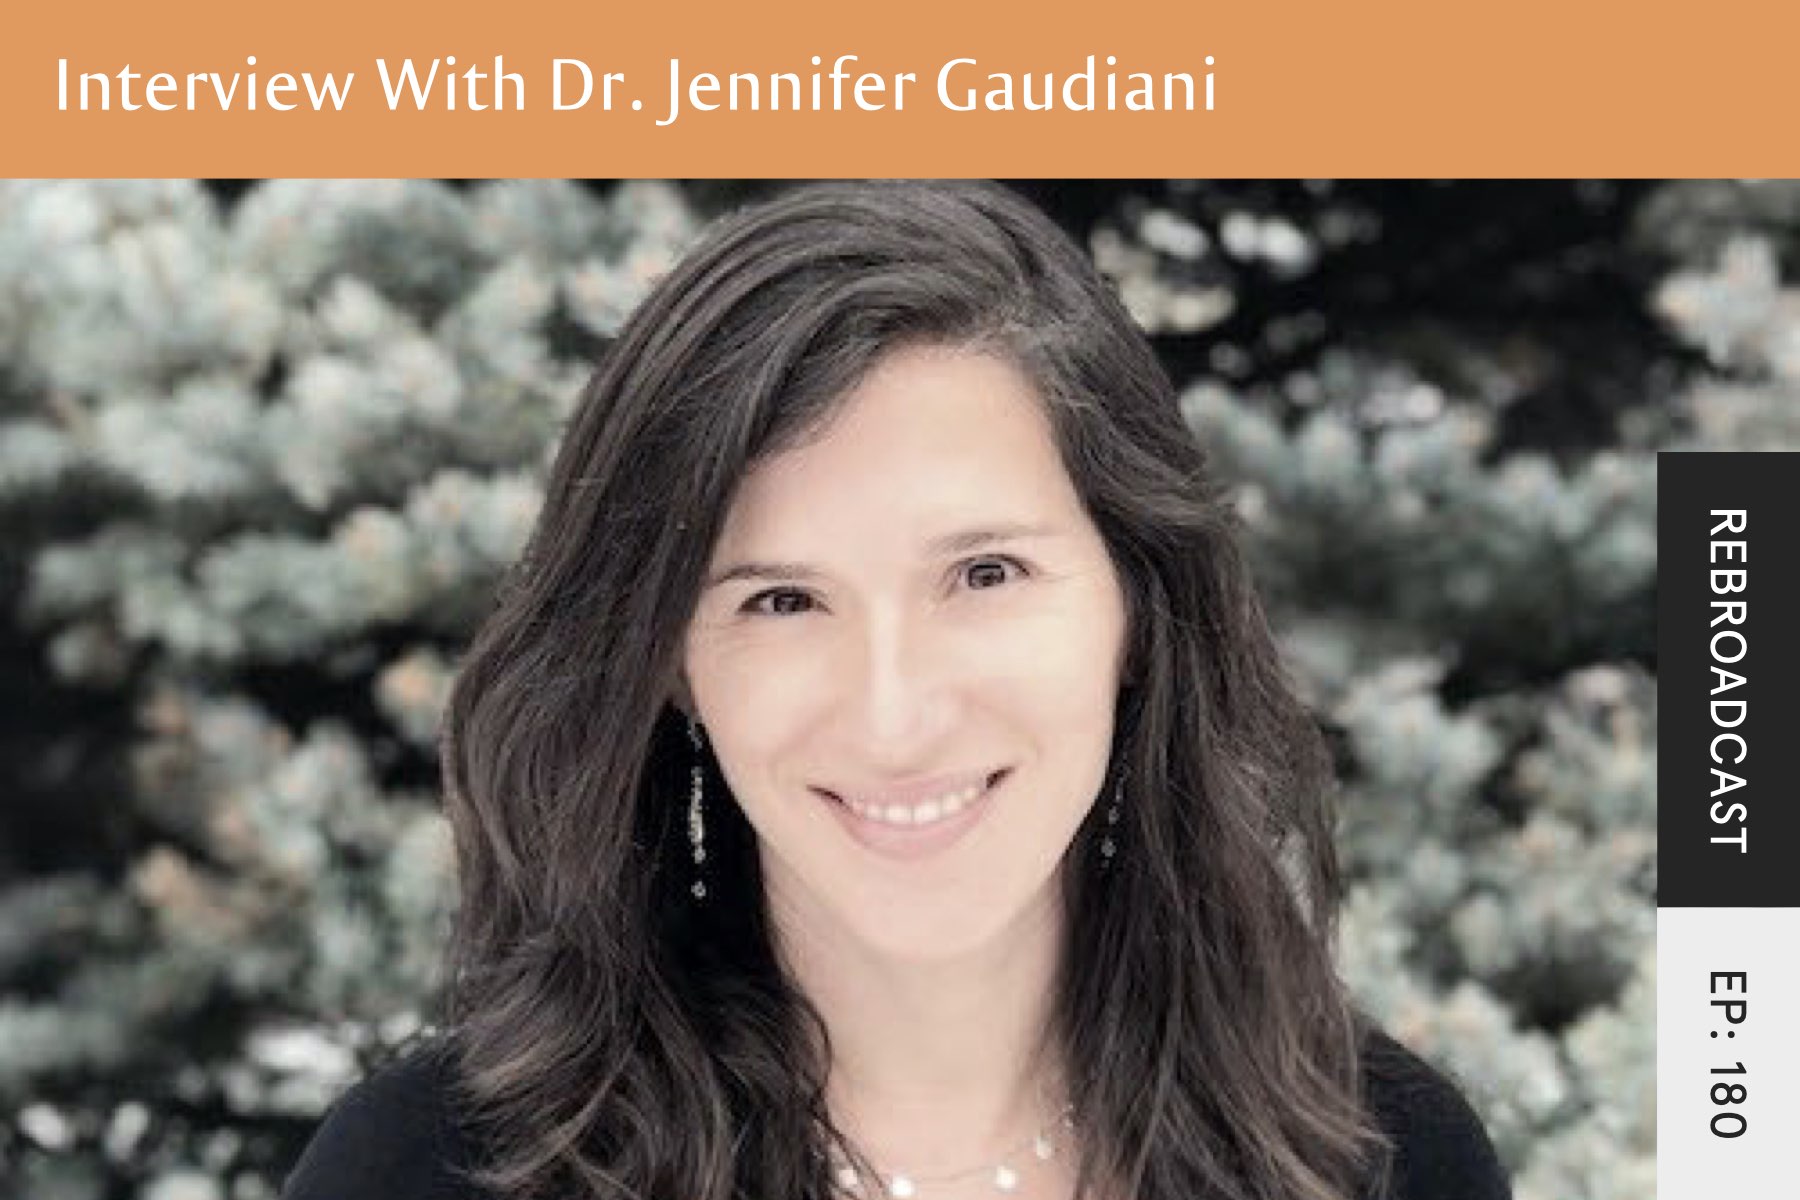 Rebroadcast: Eating Disorder Recovery With Dr. Jennifer Gaudiani - Seven Health: Eating Disorder Recovery and Anti Diet Nutritionist